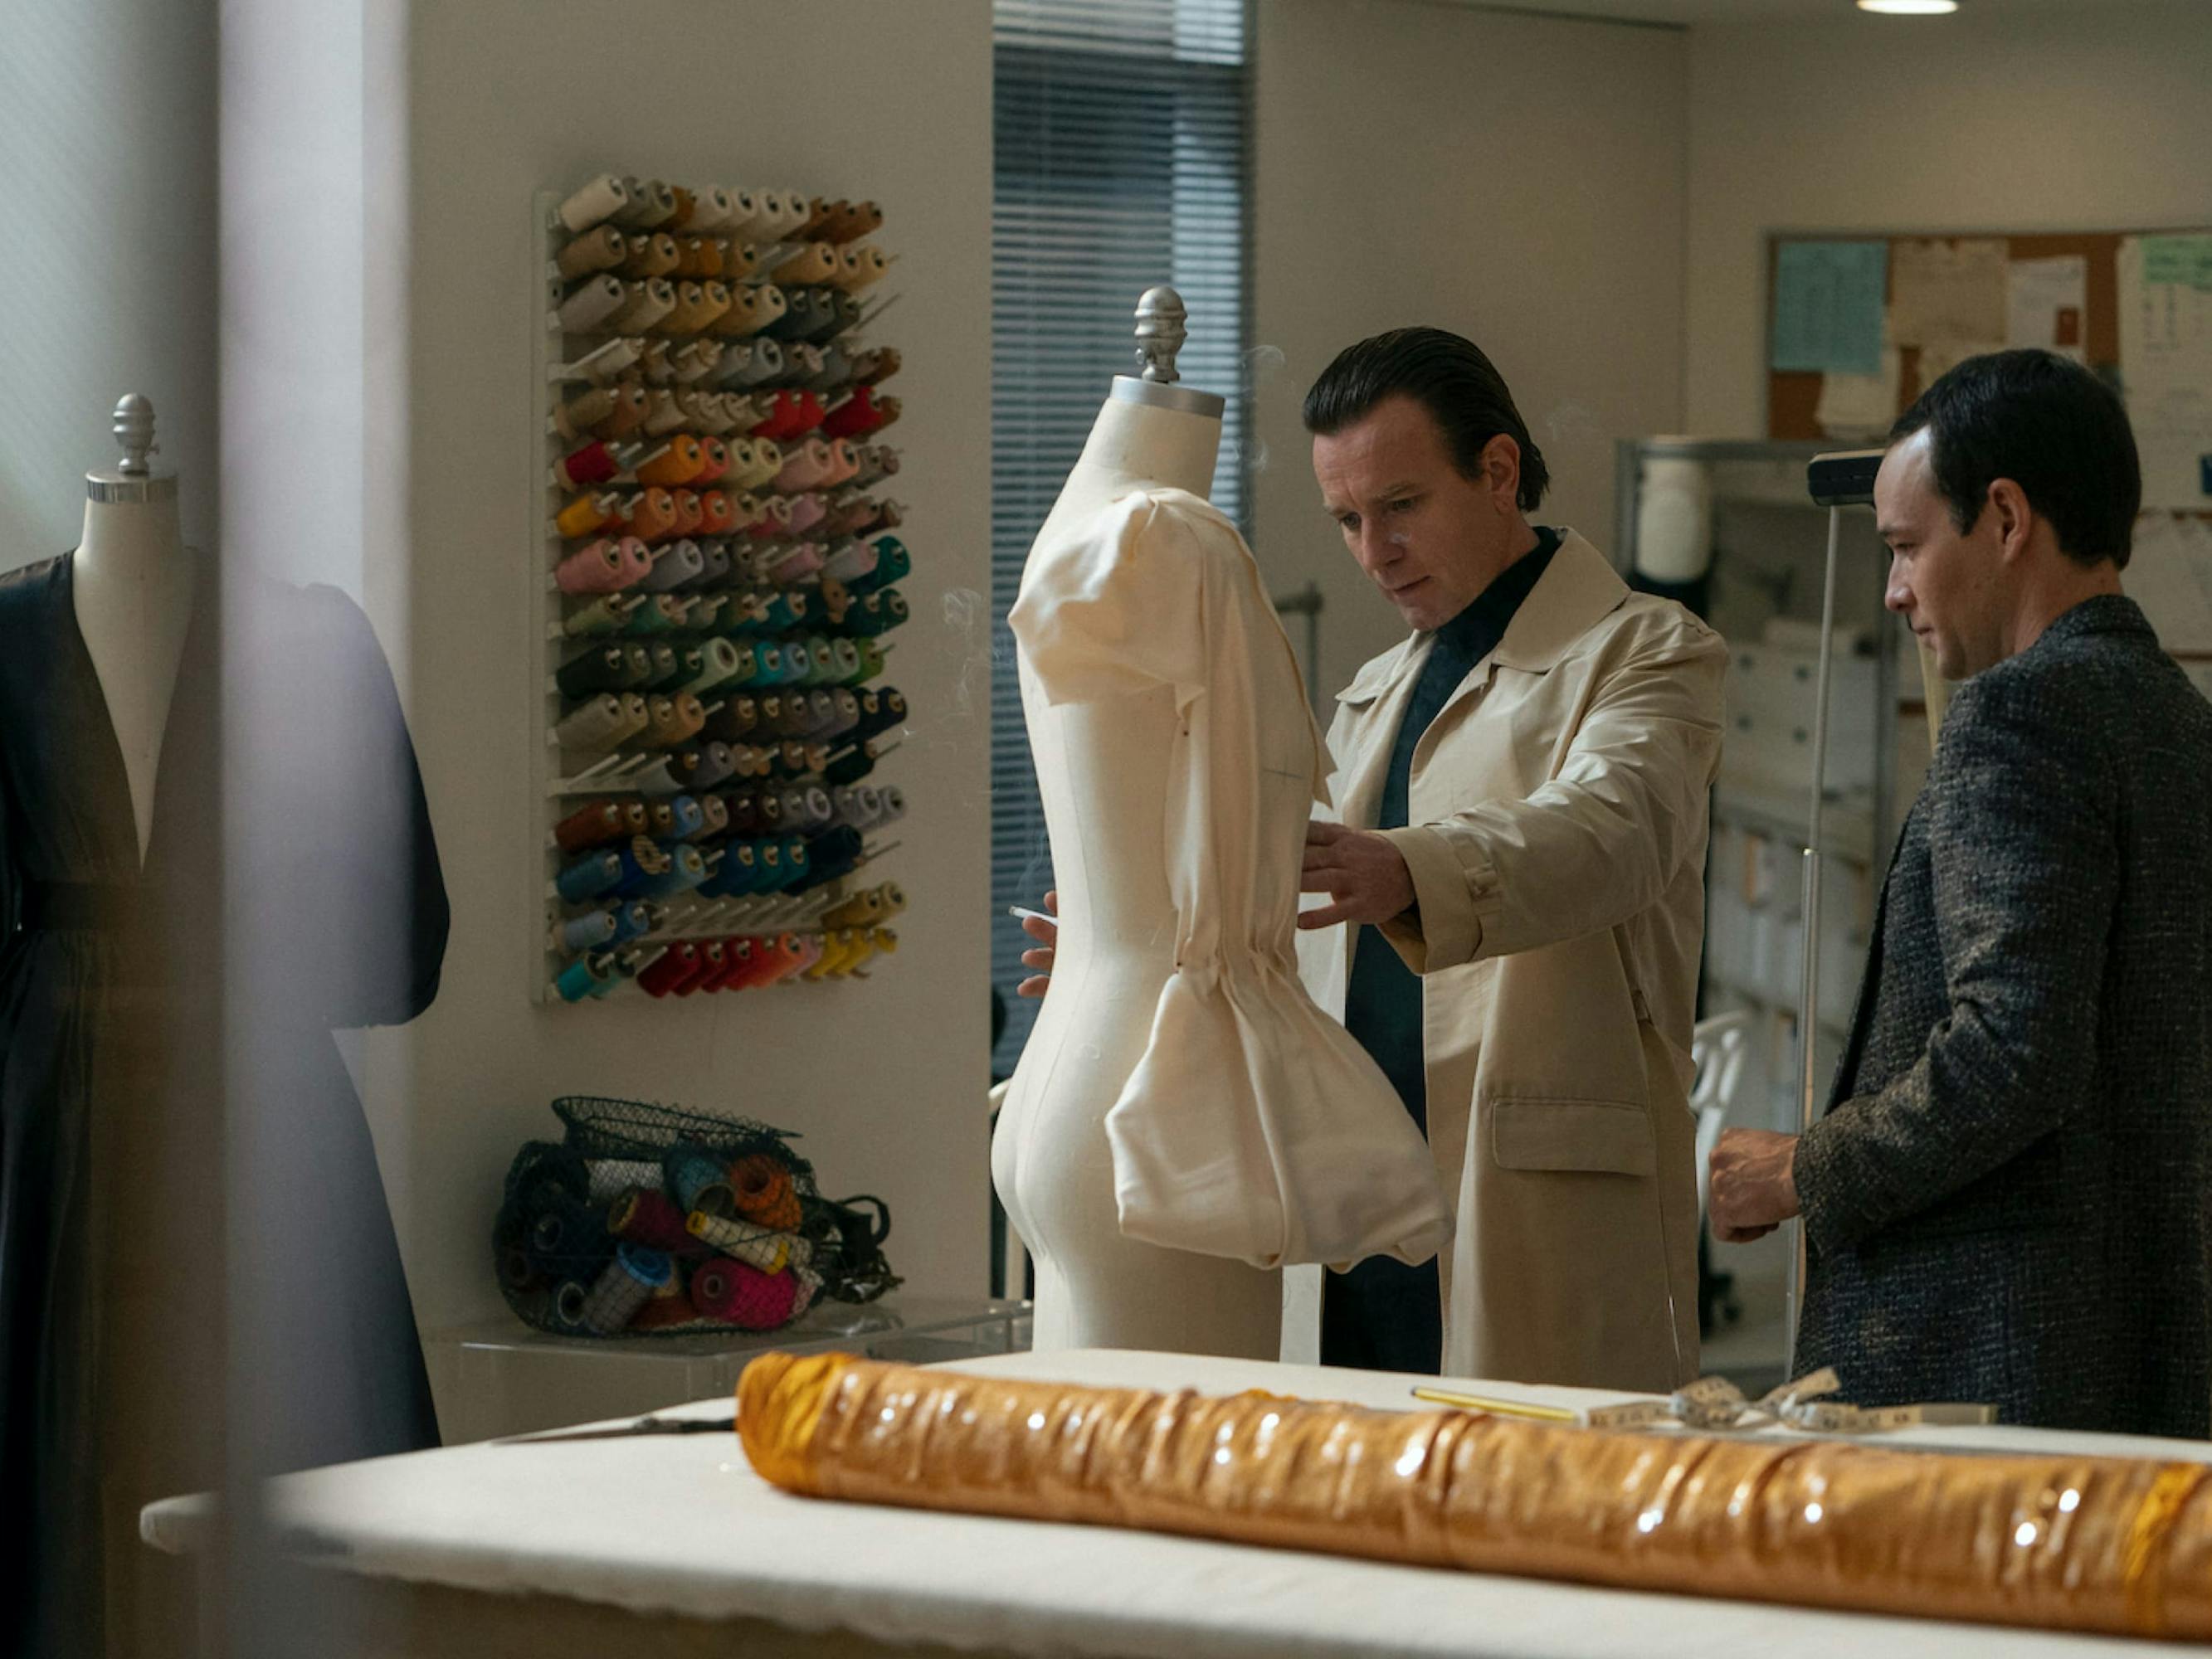 Halston (McGregor) stands in his studio with another person tending to a mannequin. He wears a tan coat and black turtleneck. His companion is in a plaid blazer. There are spools of thread behind them, and the mannequin in question appears to wear a white shirt.